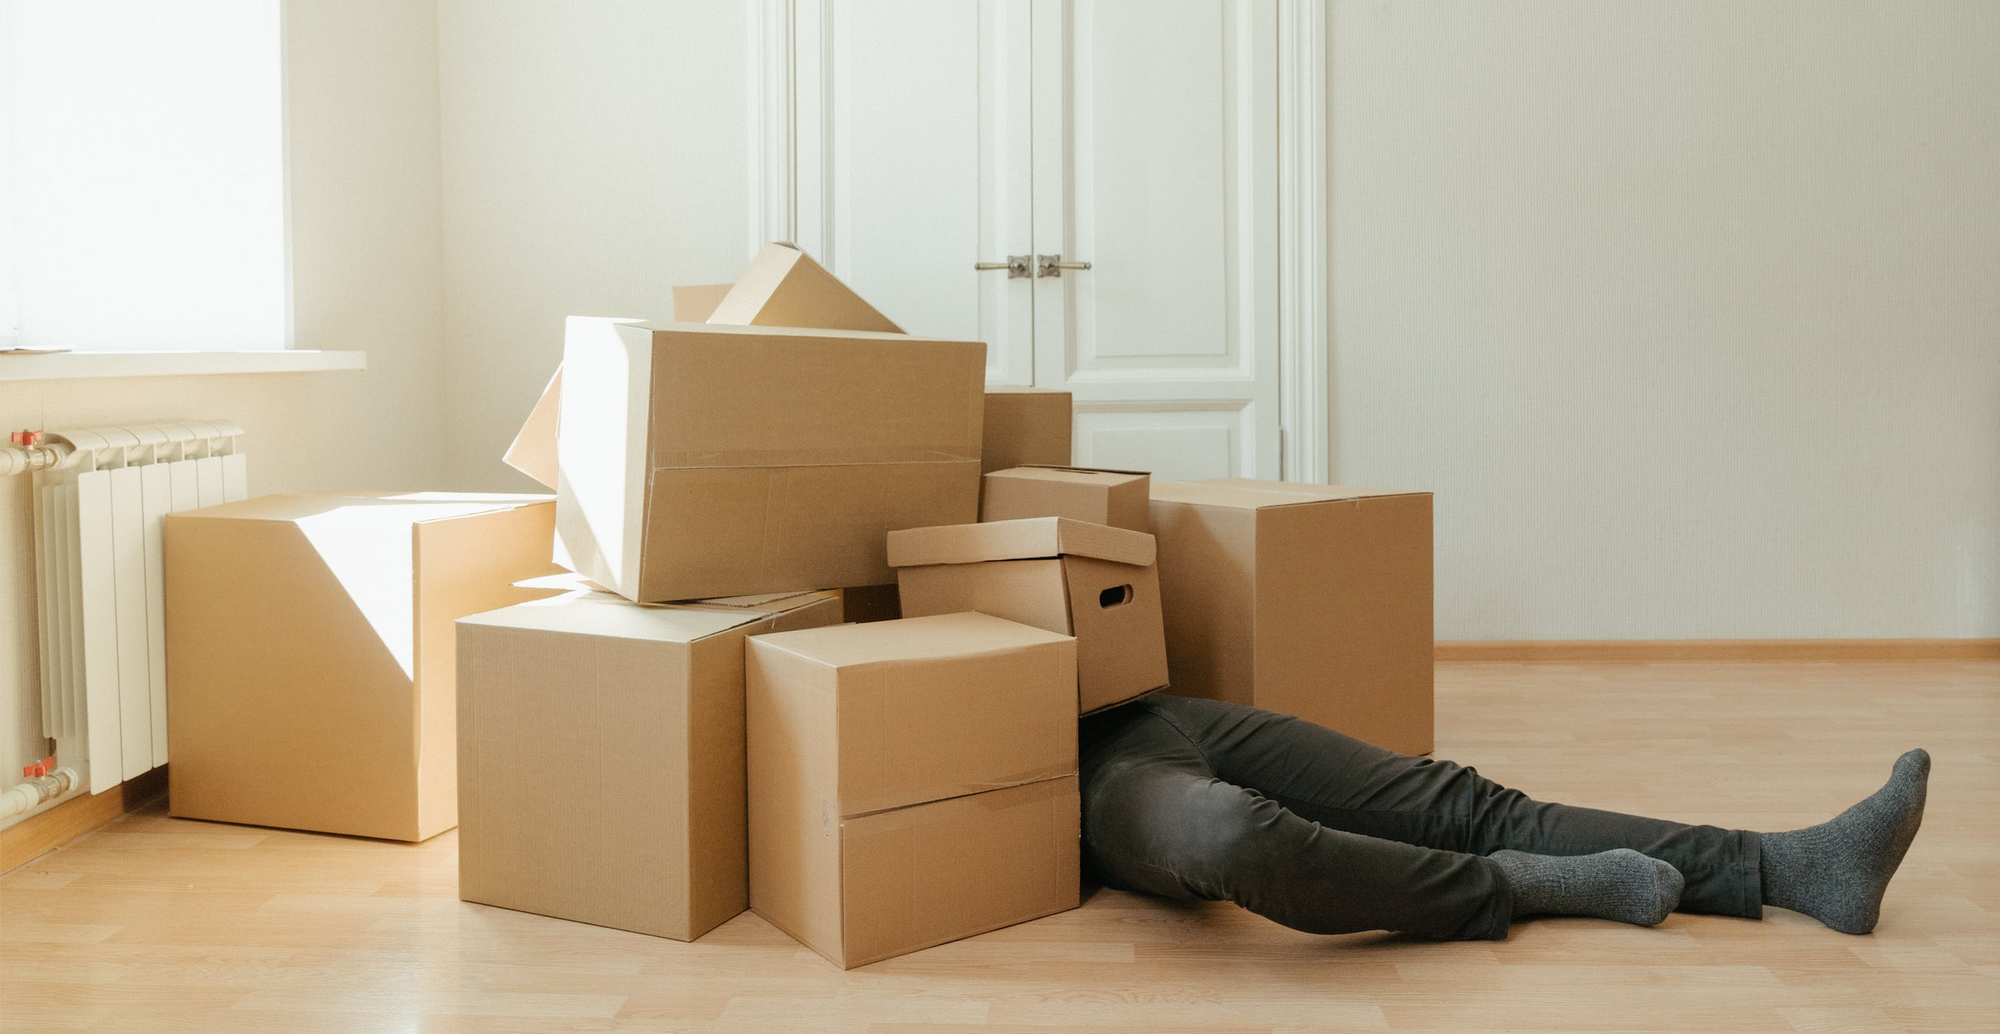 Brown cardboard moving boxes on the floor, with a person beneath them whose feet are sticking out